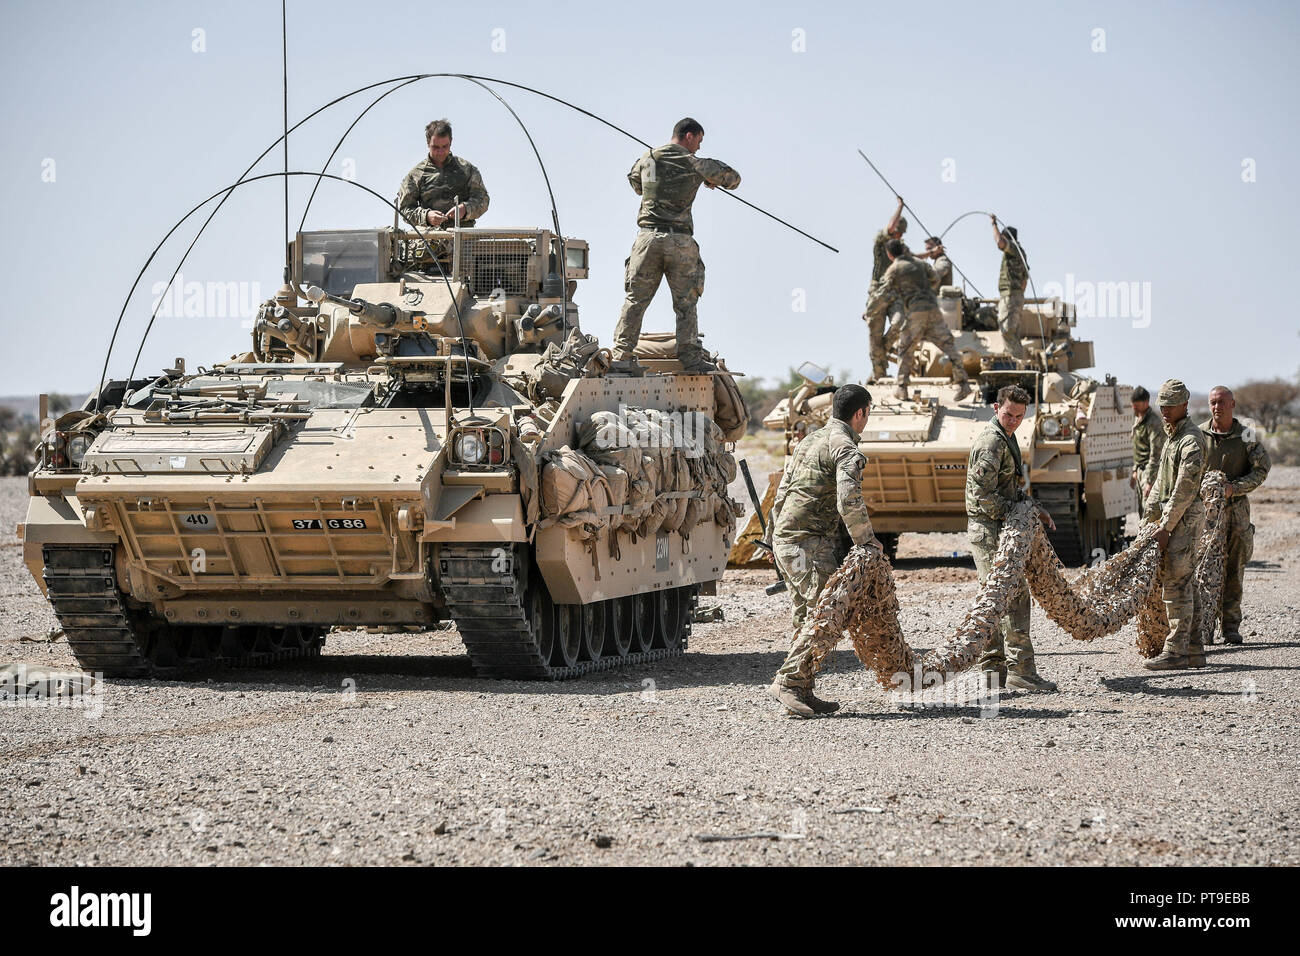 A Warrior armoured fighting vehicle crew prepare to camouflage their wagon in the Oman desert, where UK forces are taking part in a month-long exercise, Saif Sareea 3. Stock Photo